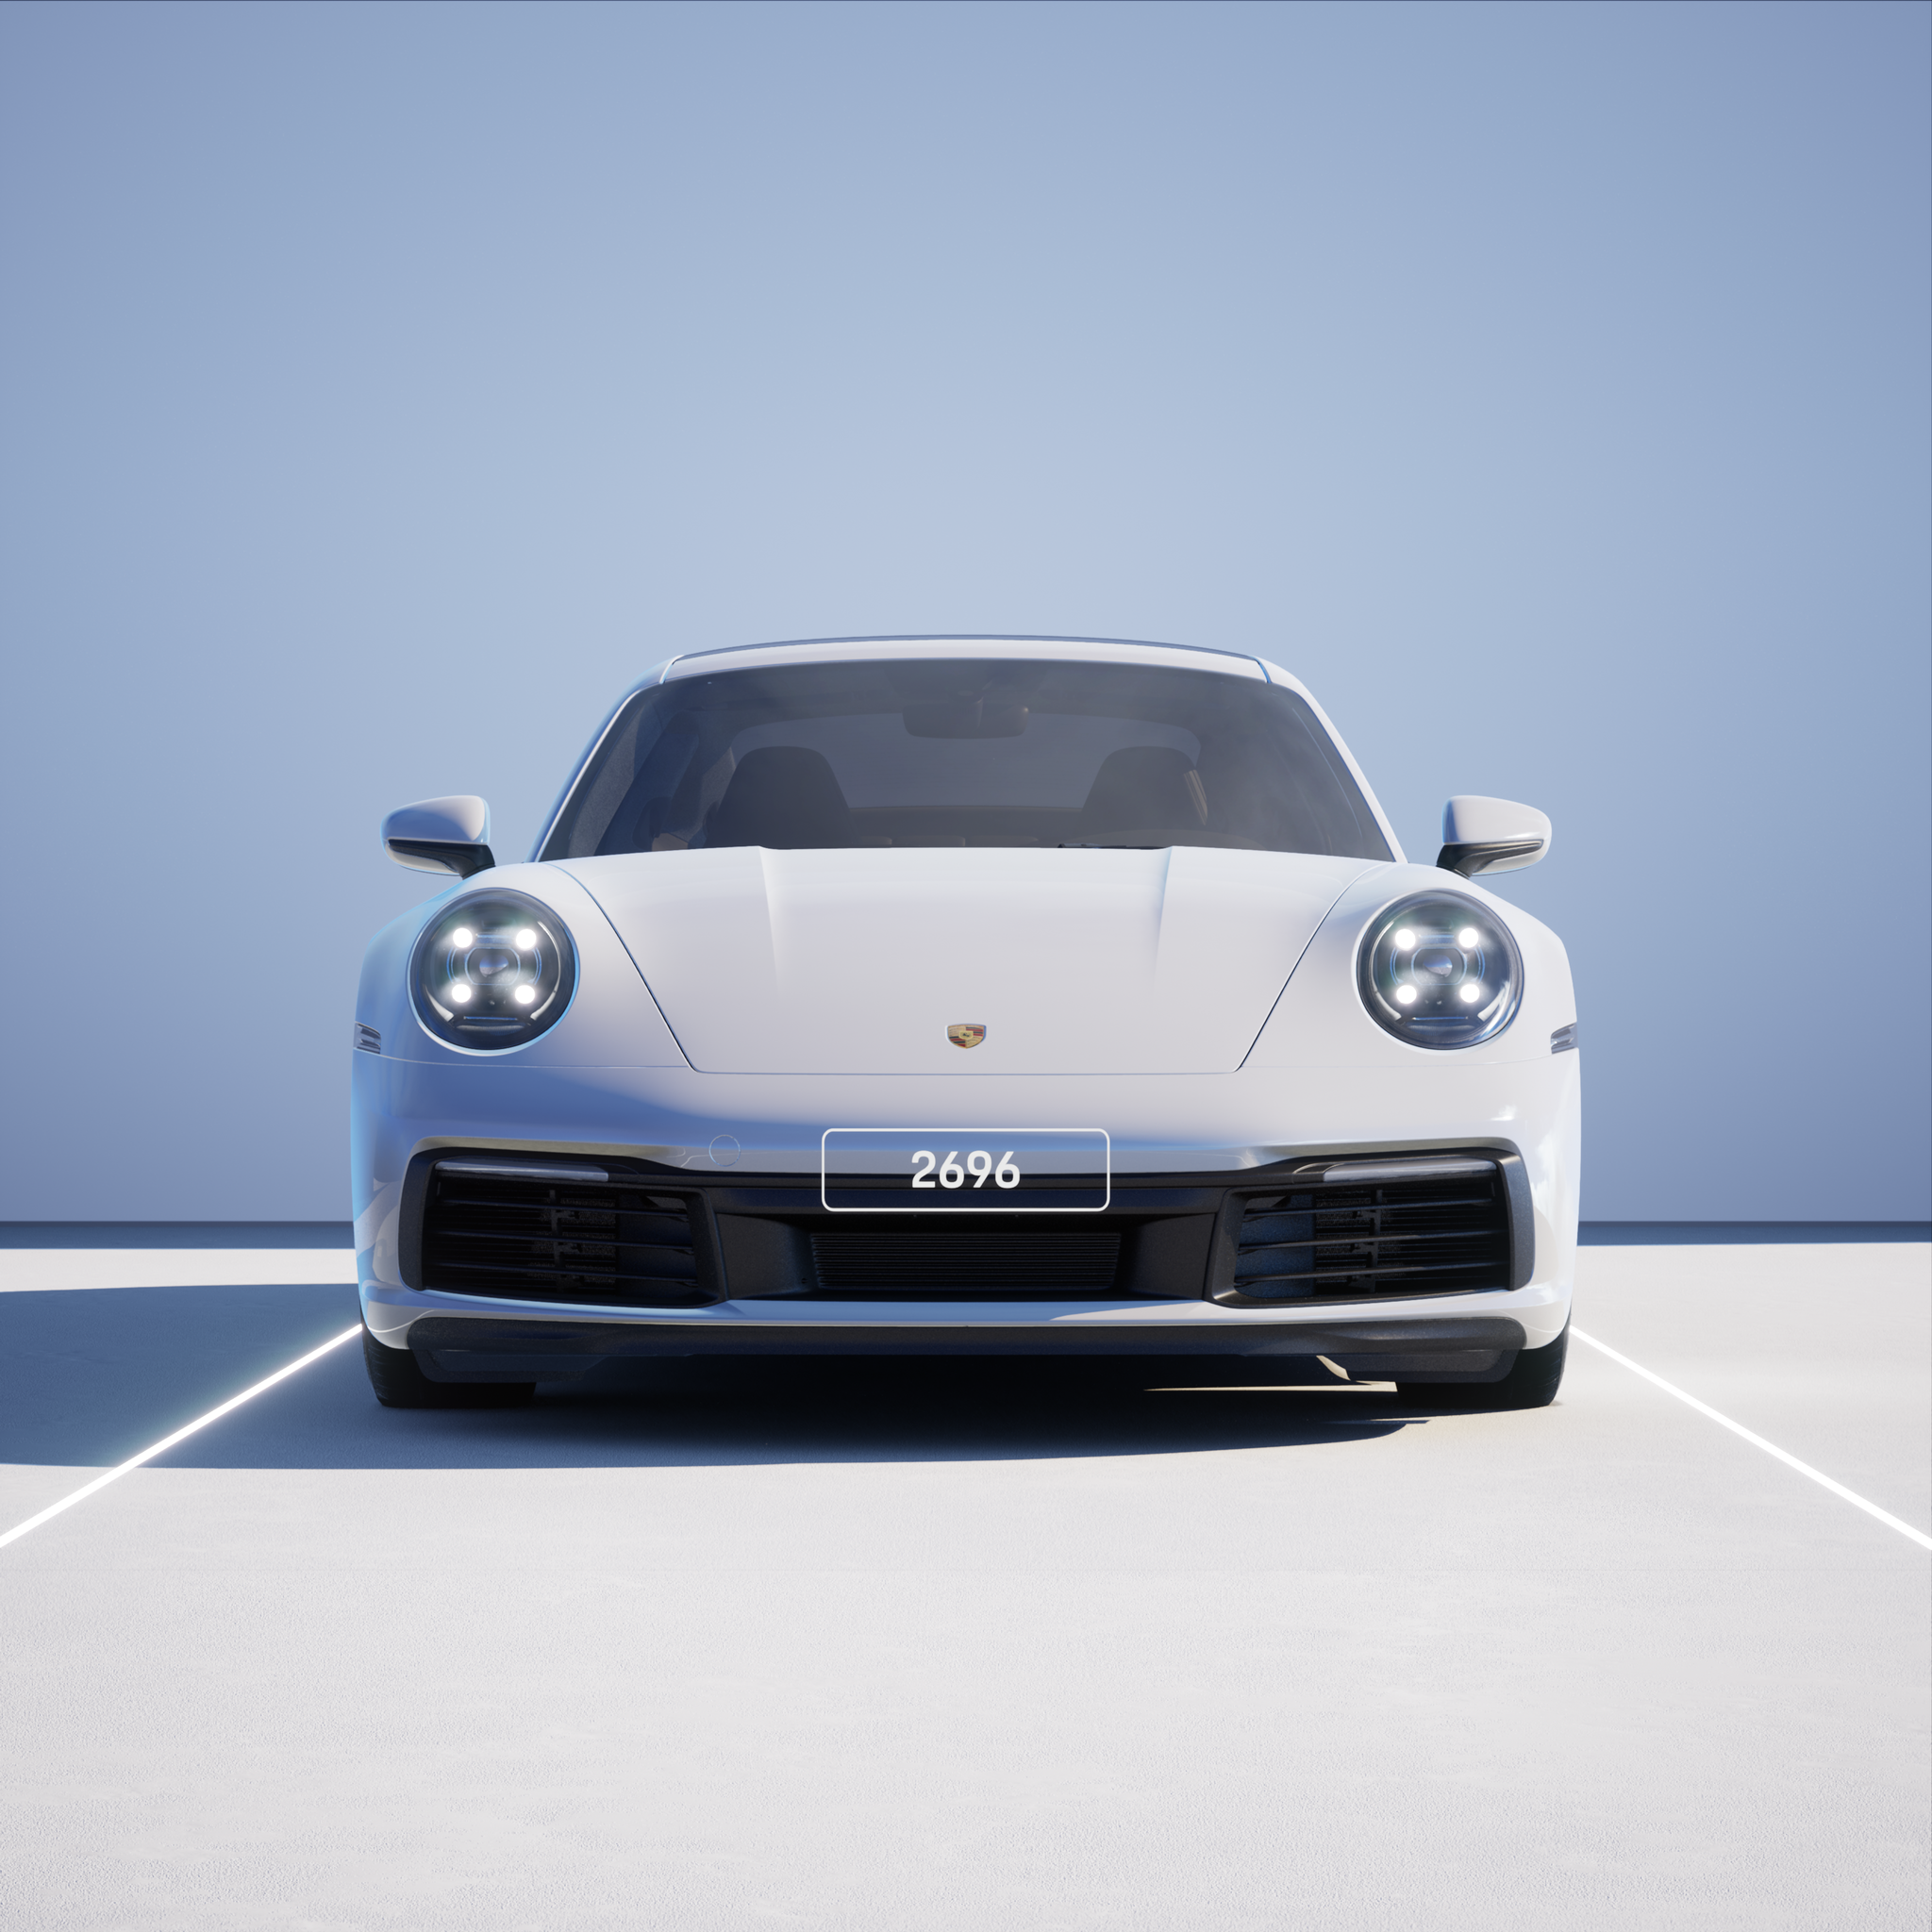 The PORSCHΞ 911 2696 image in phase